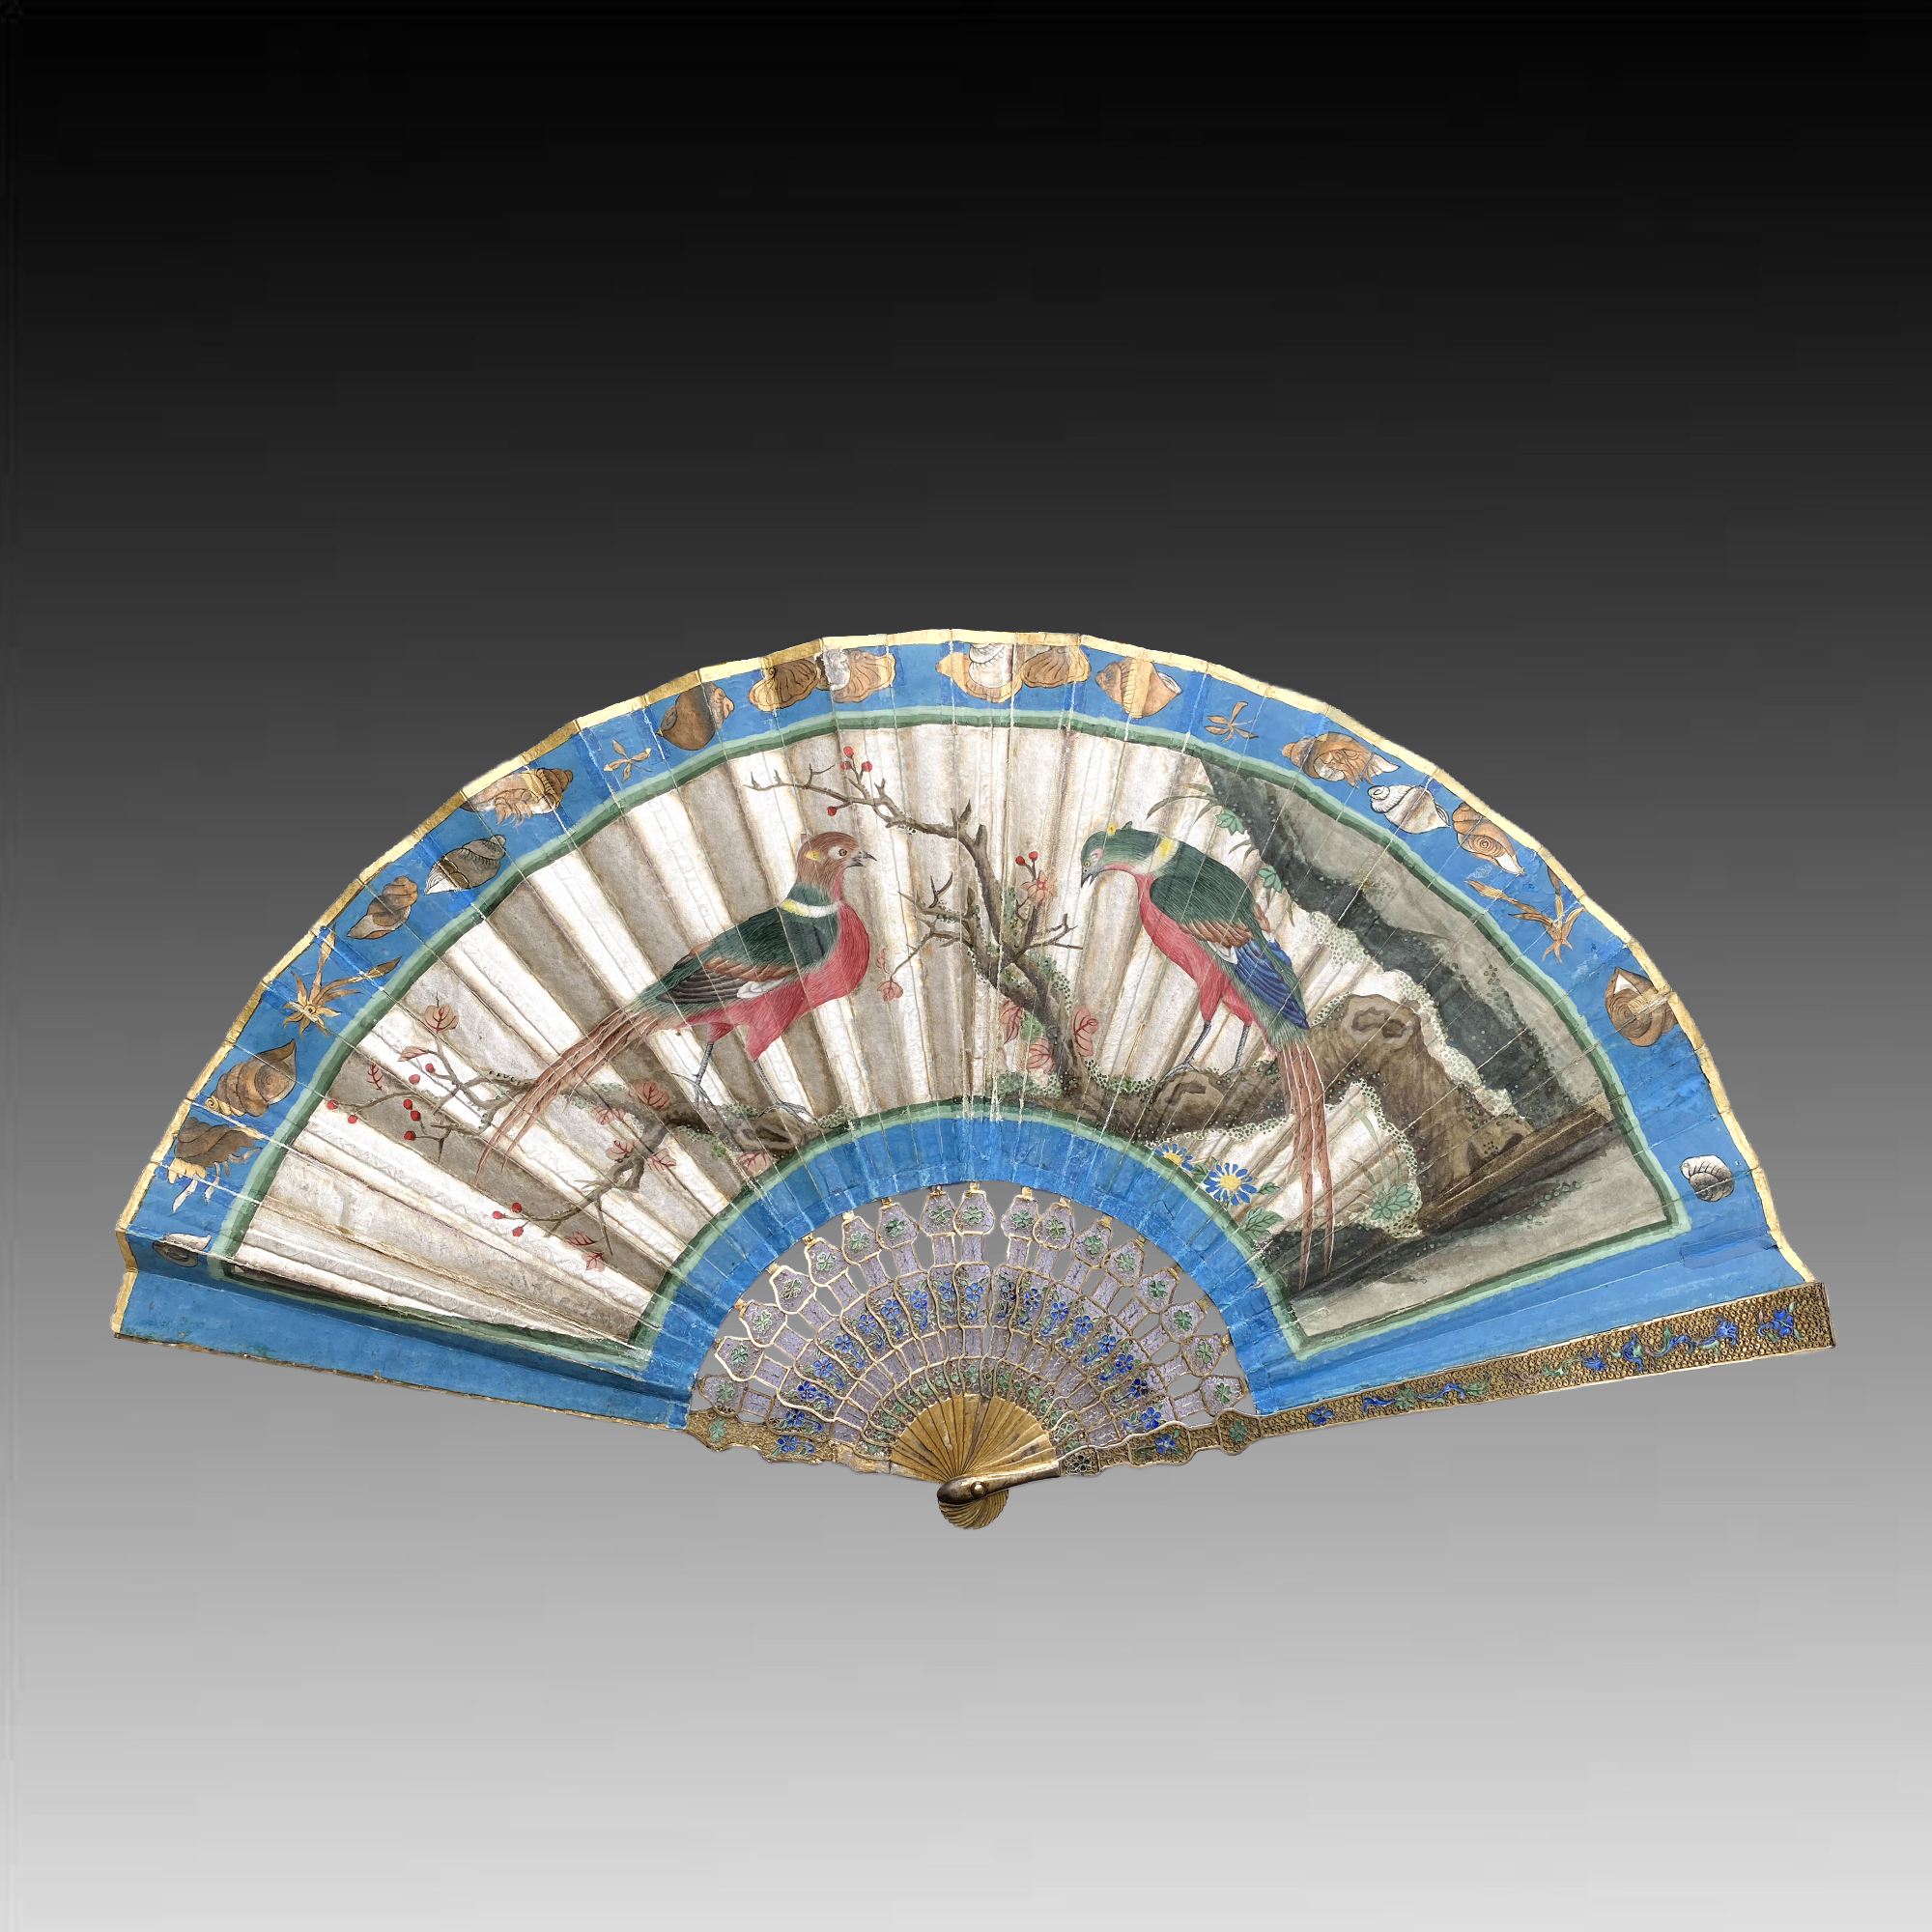 China, Fan representing a lion, Canton, late 18th century.